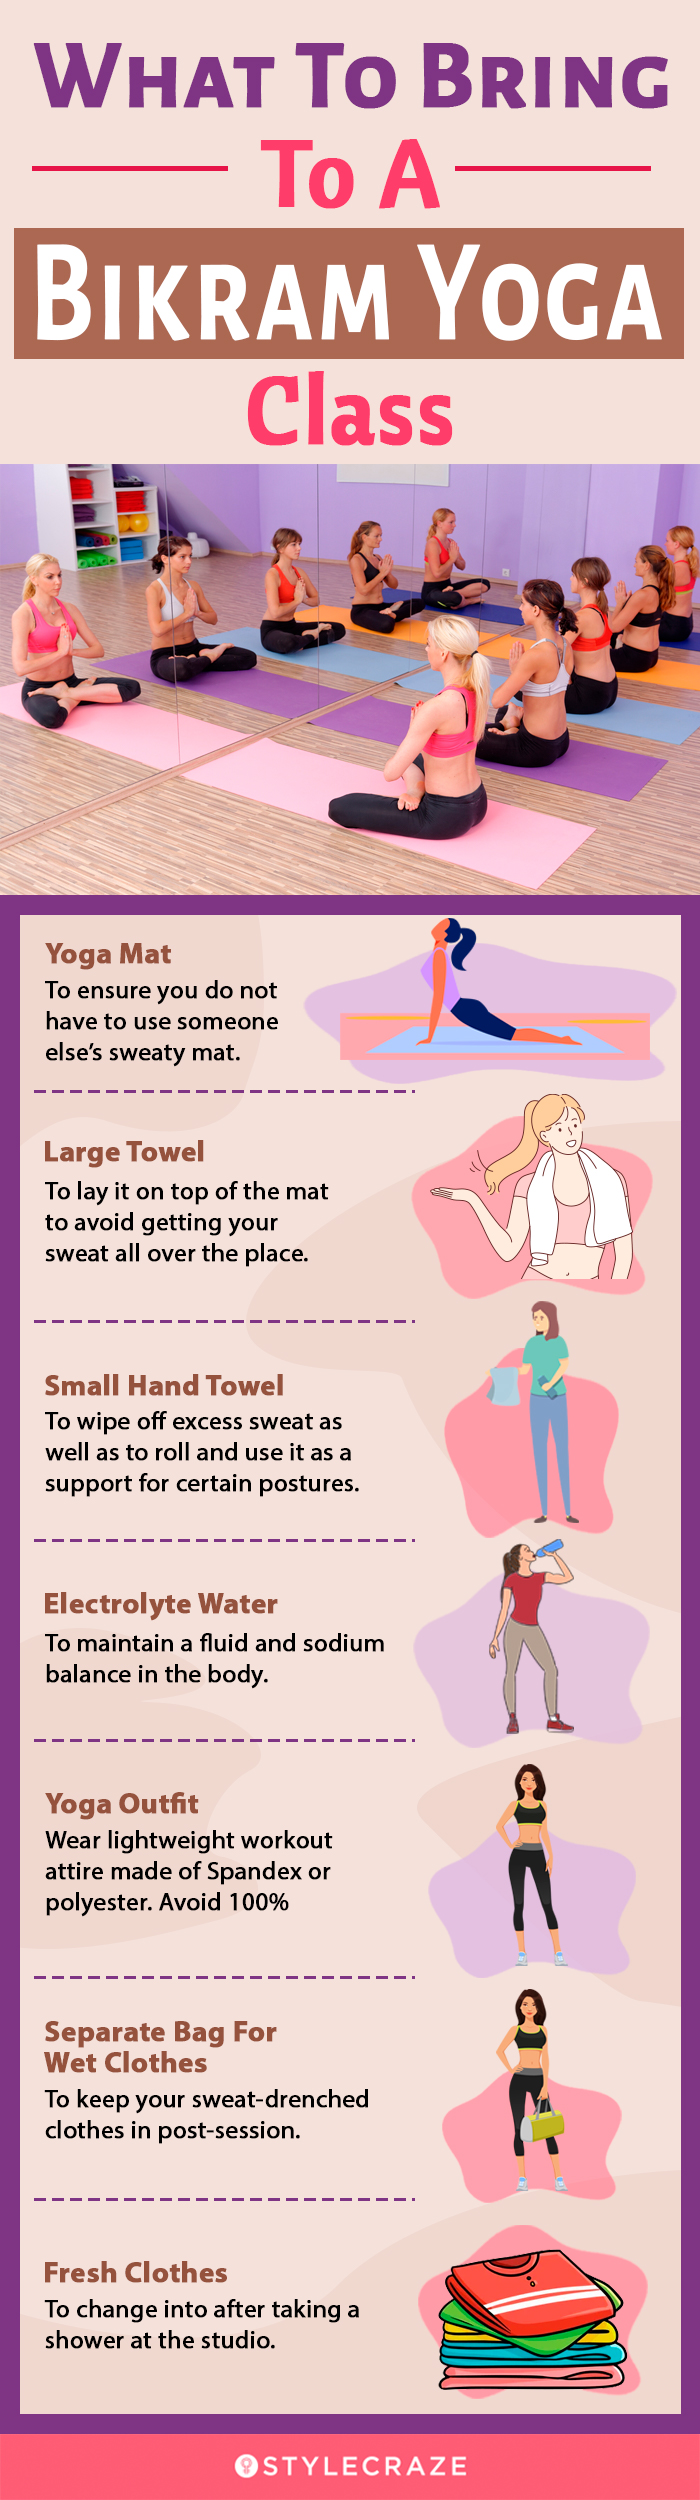 what to bring to a bikram yoga class [infographic]